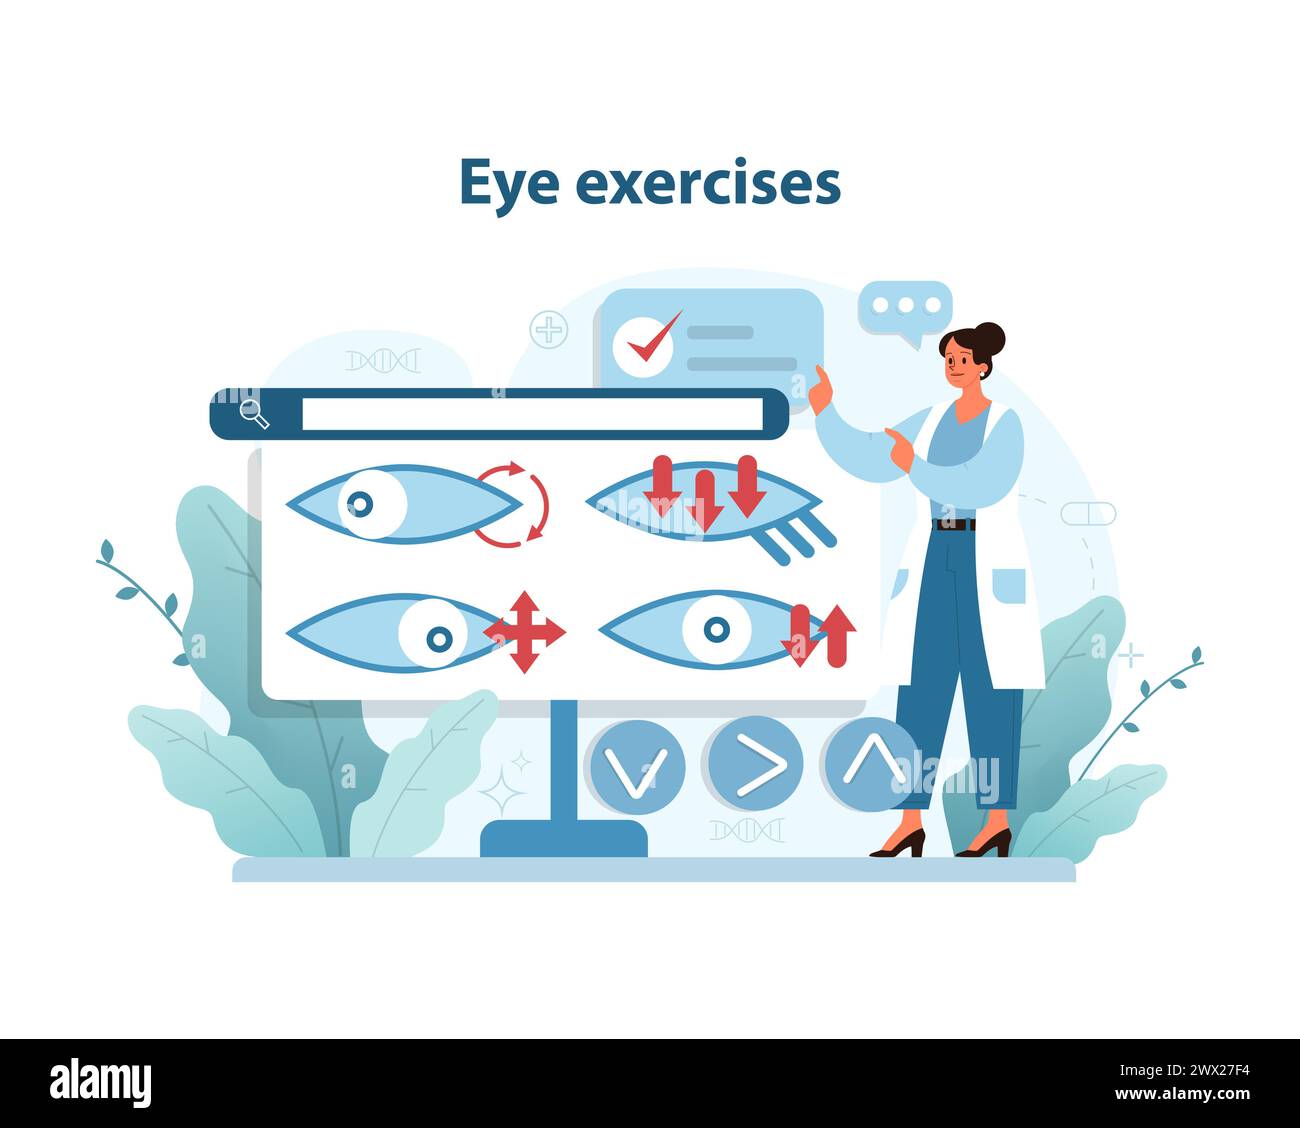 Eye Exercise Guide Illustration. A doctor recommends ocular exercises to maintain eye health, featuring direction arrows and eye diagrams. Flat vector illustration. Stock Vector